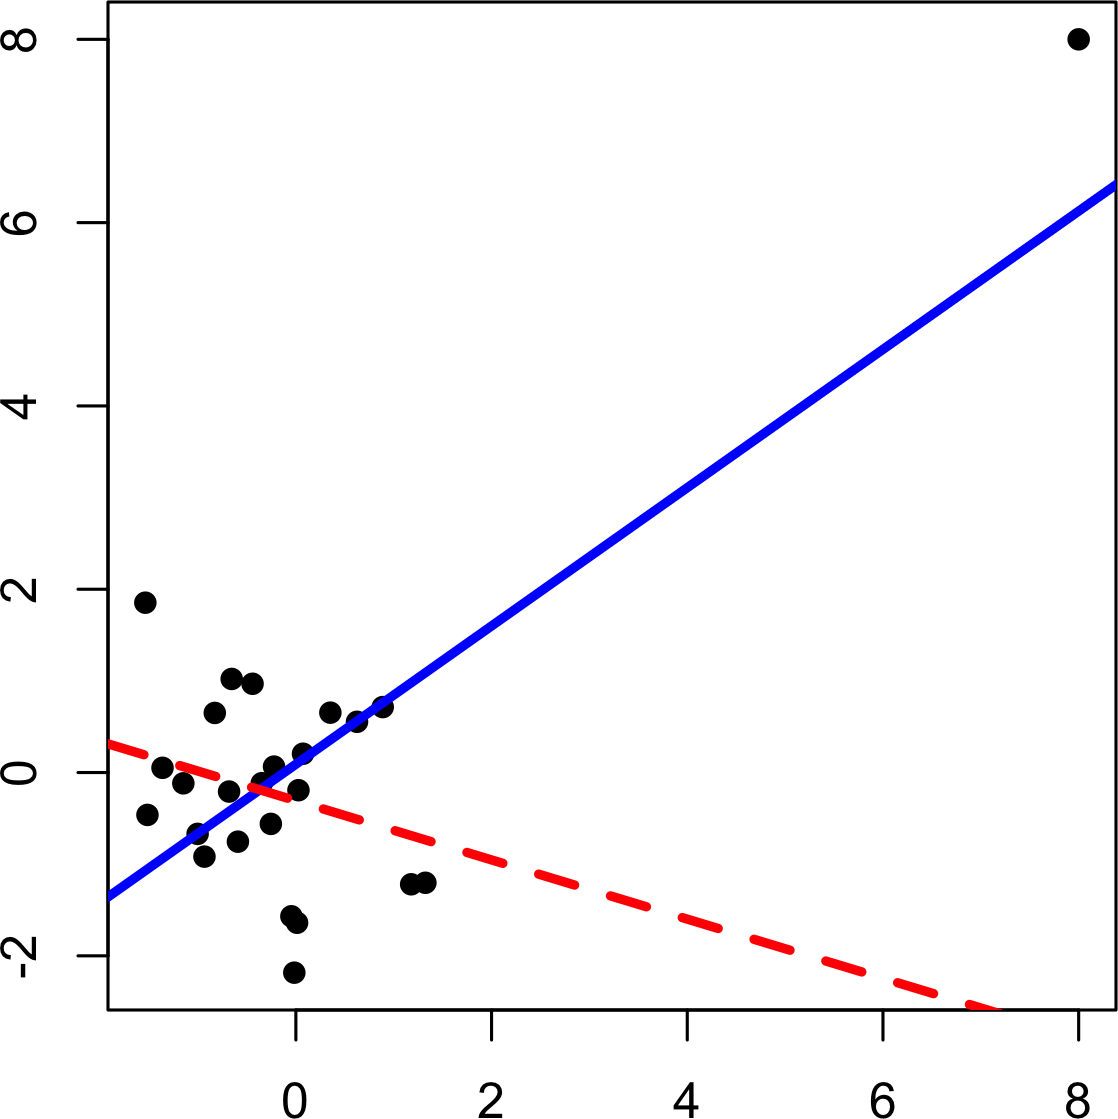 An example of an influential data point in regression